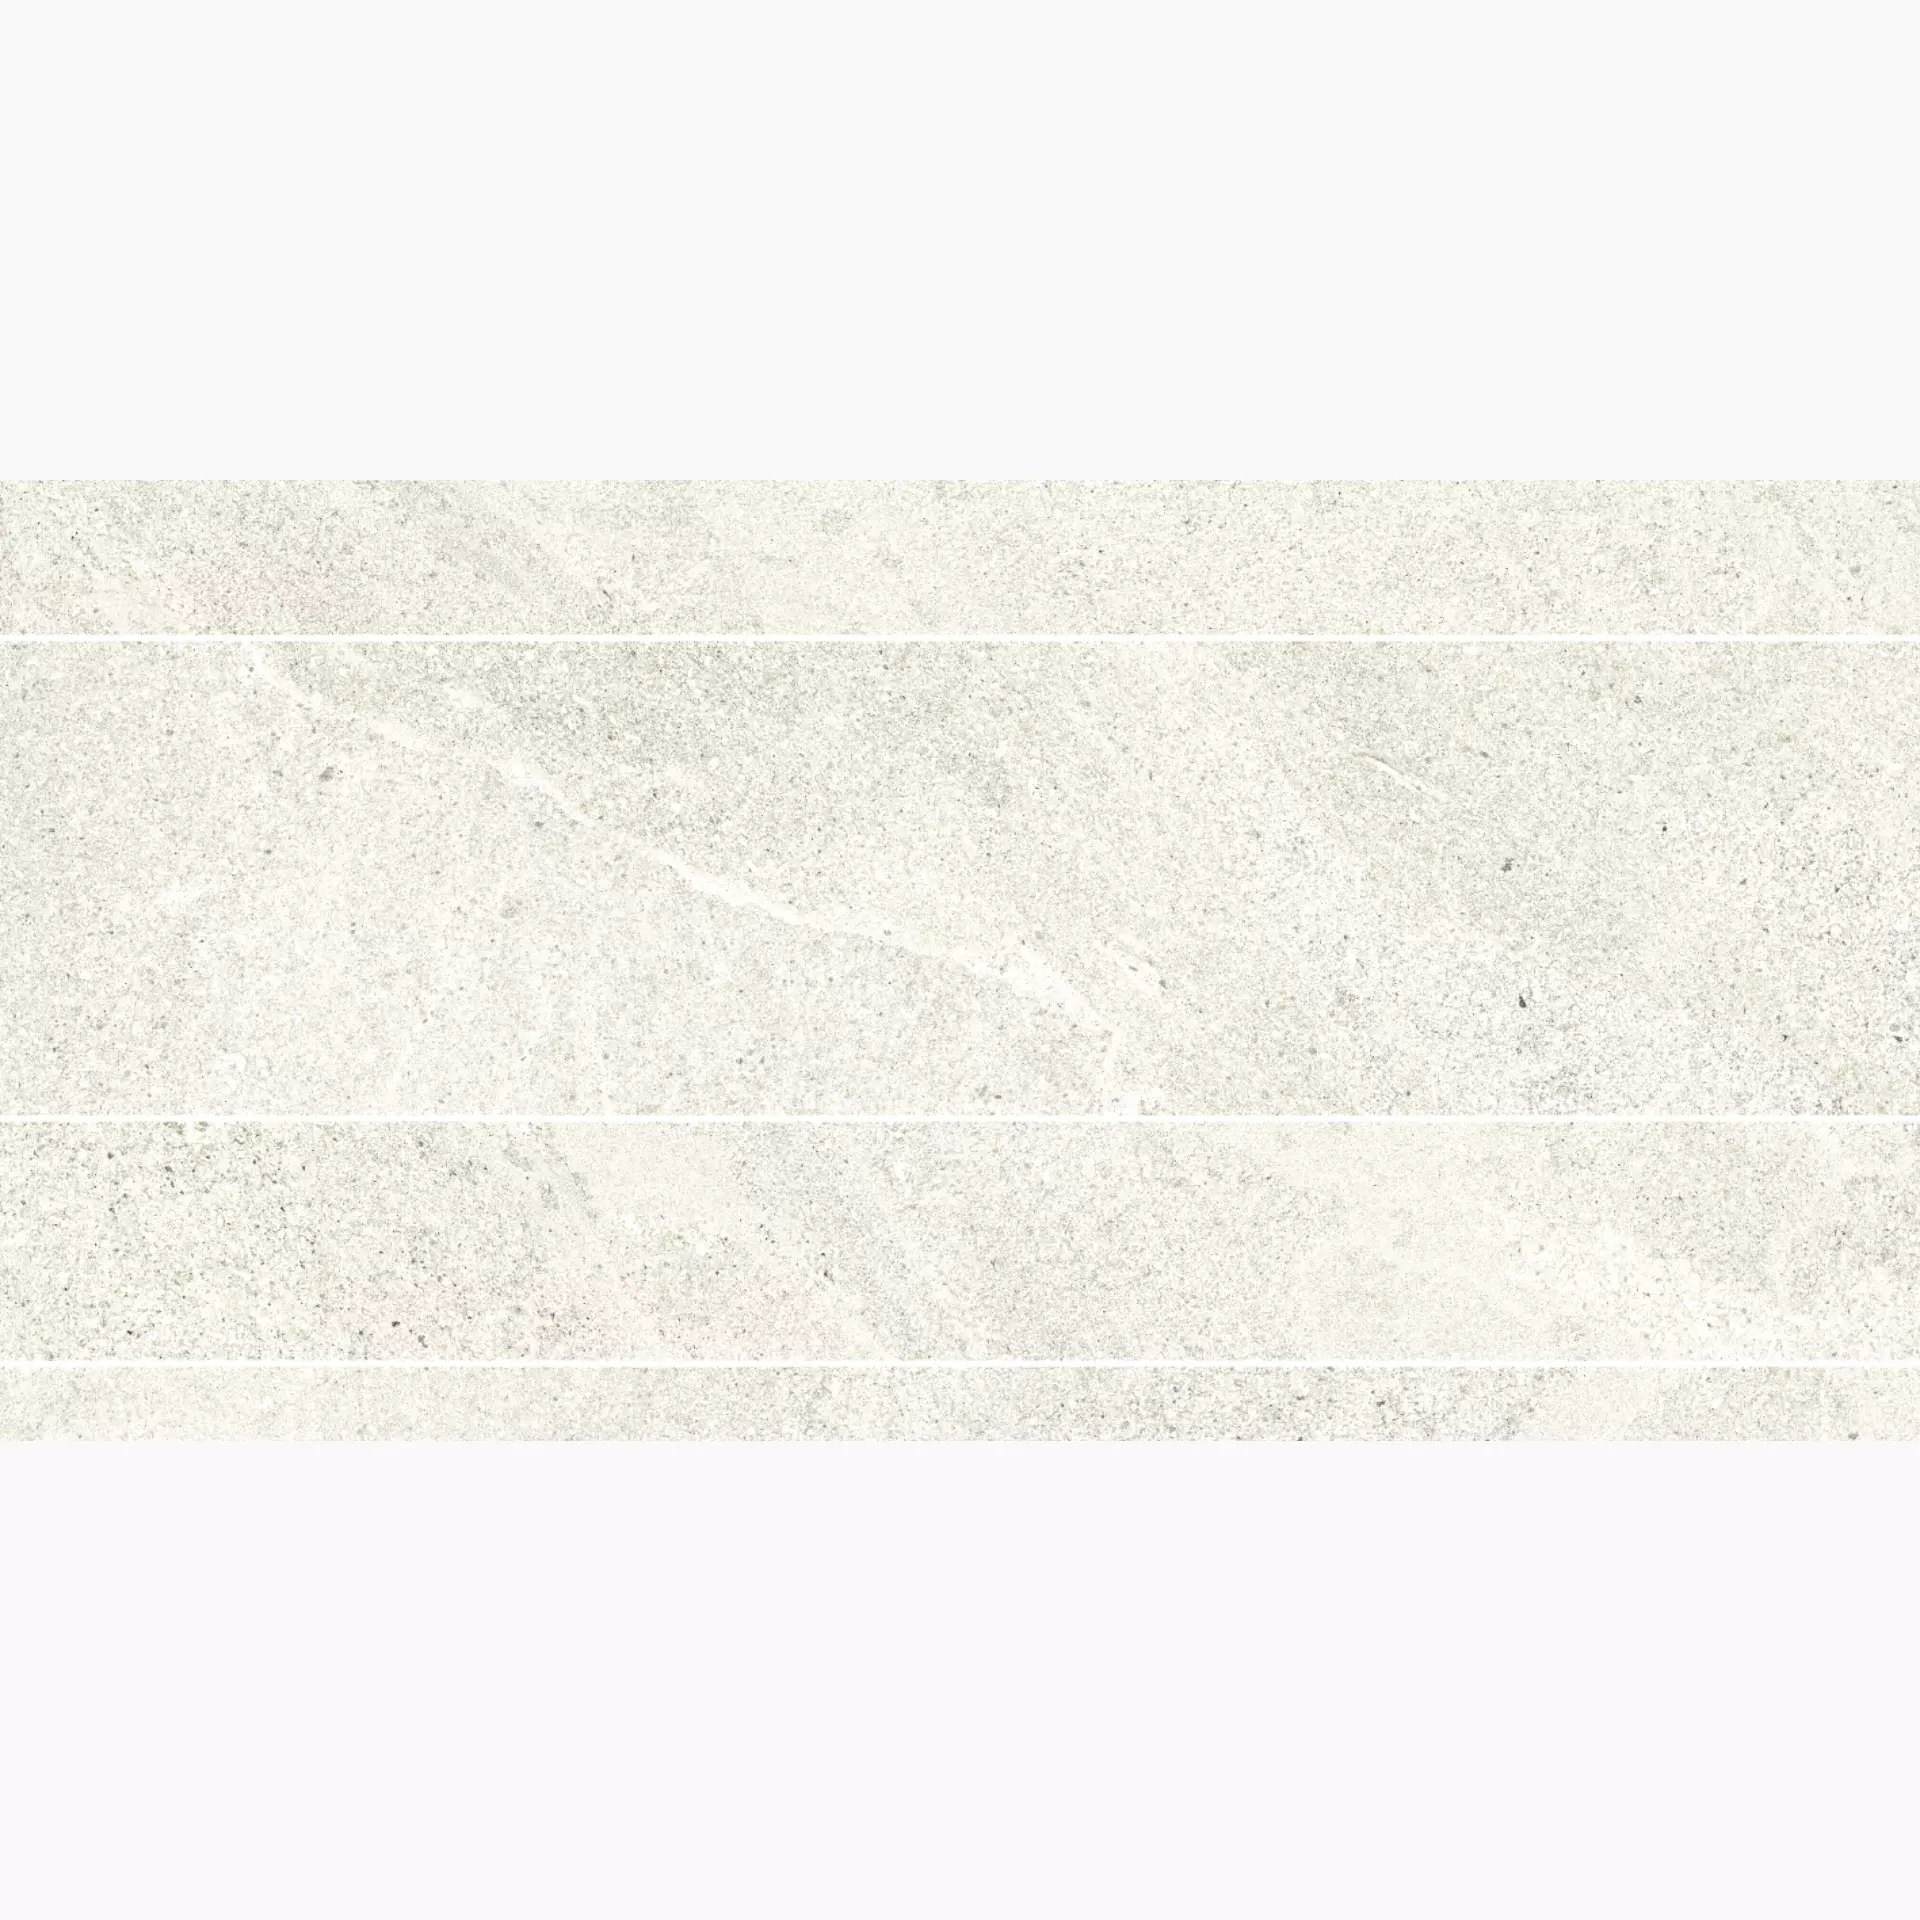 Refin Tune Snow Soft Mosaic Linea (Mix 2) NA23 30x60cm rectified 9mm